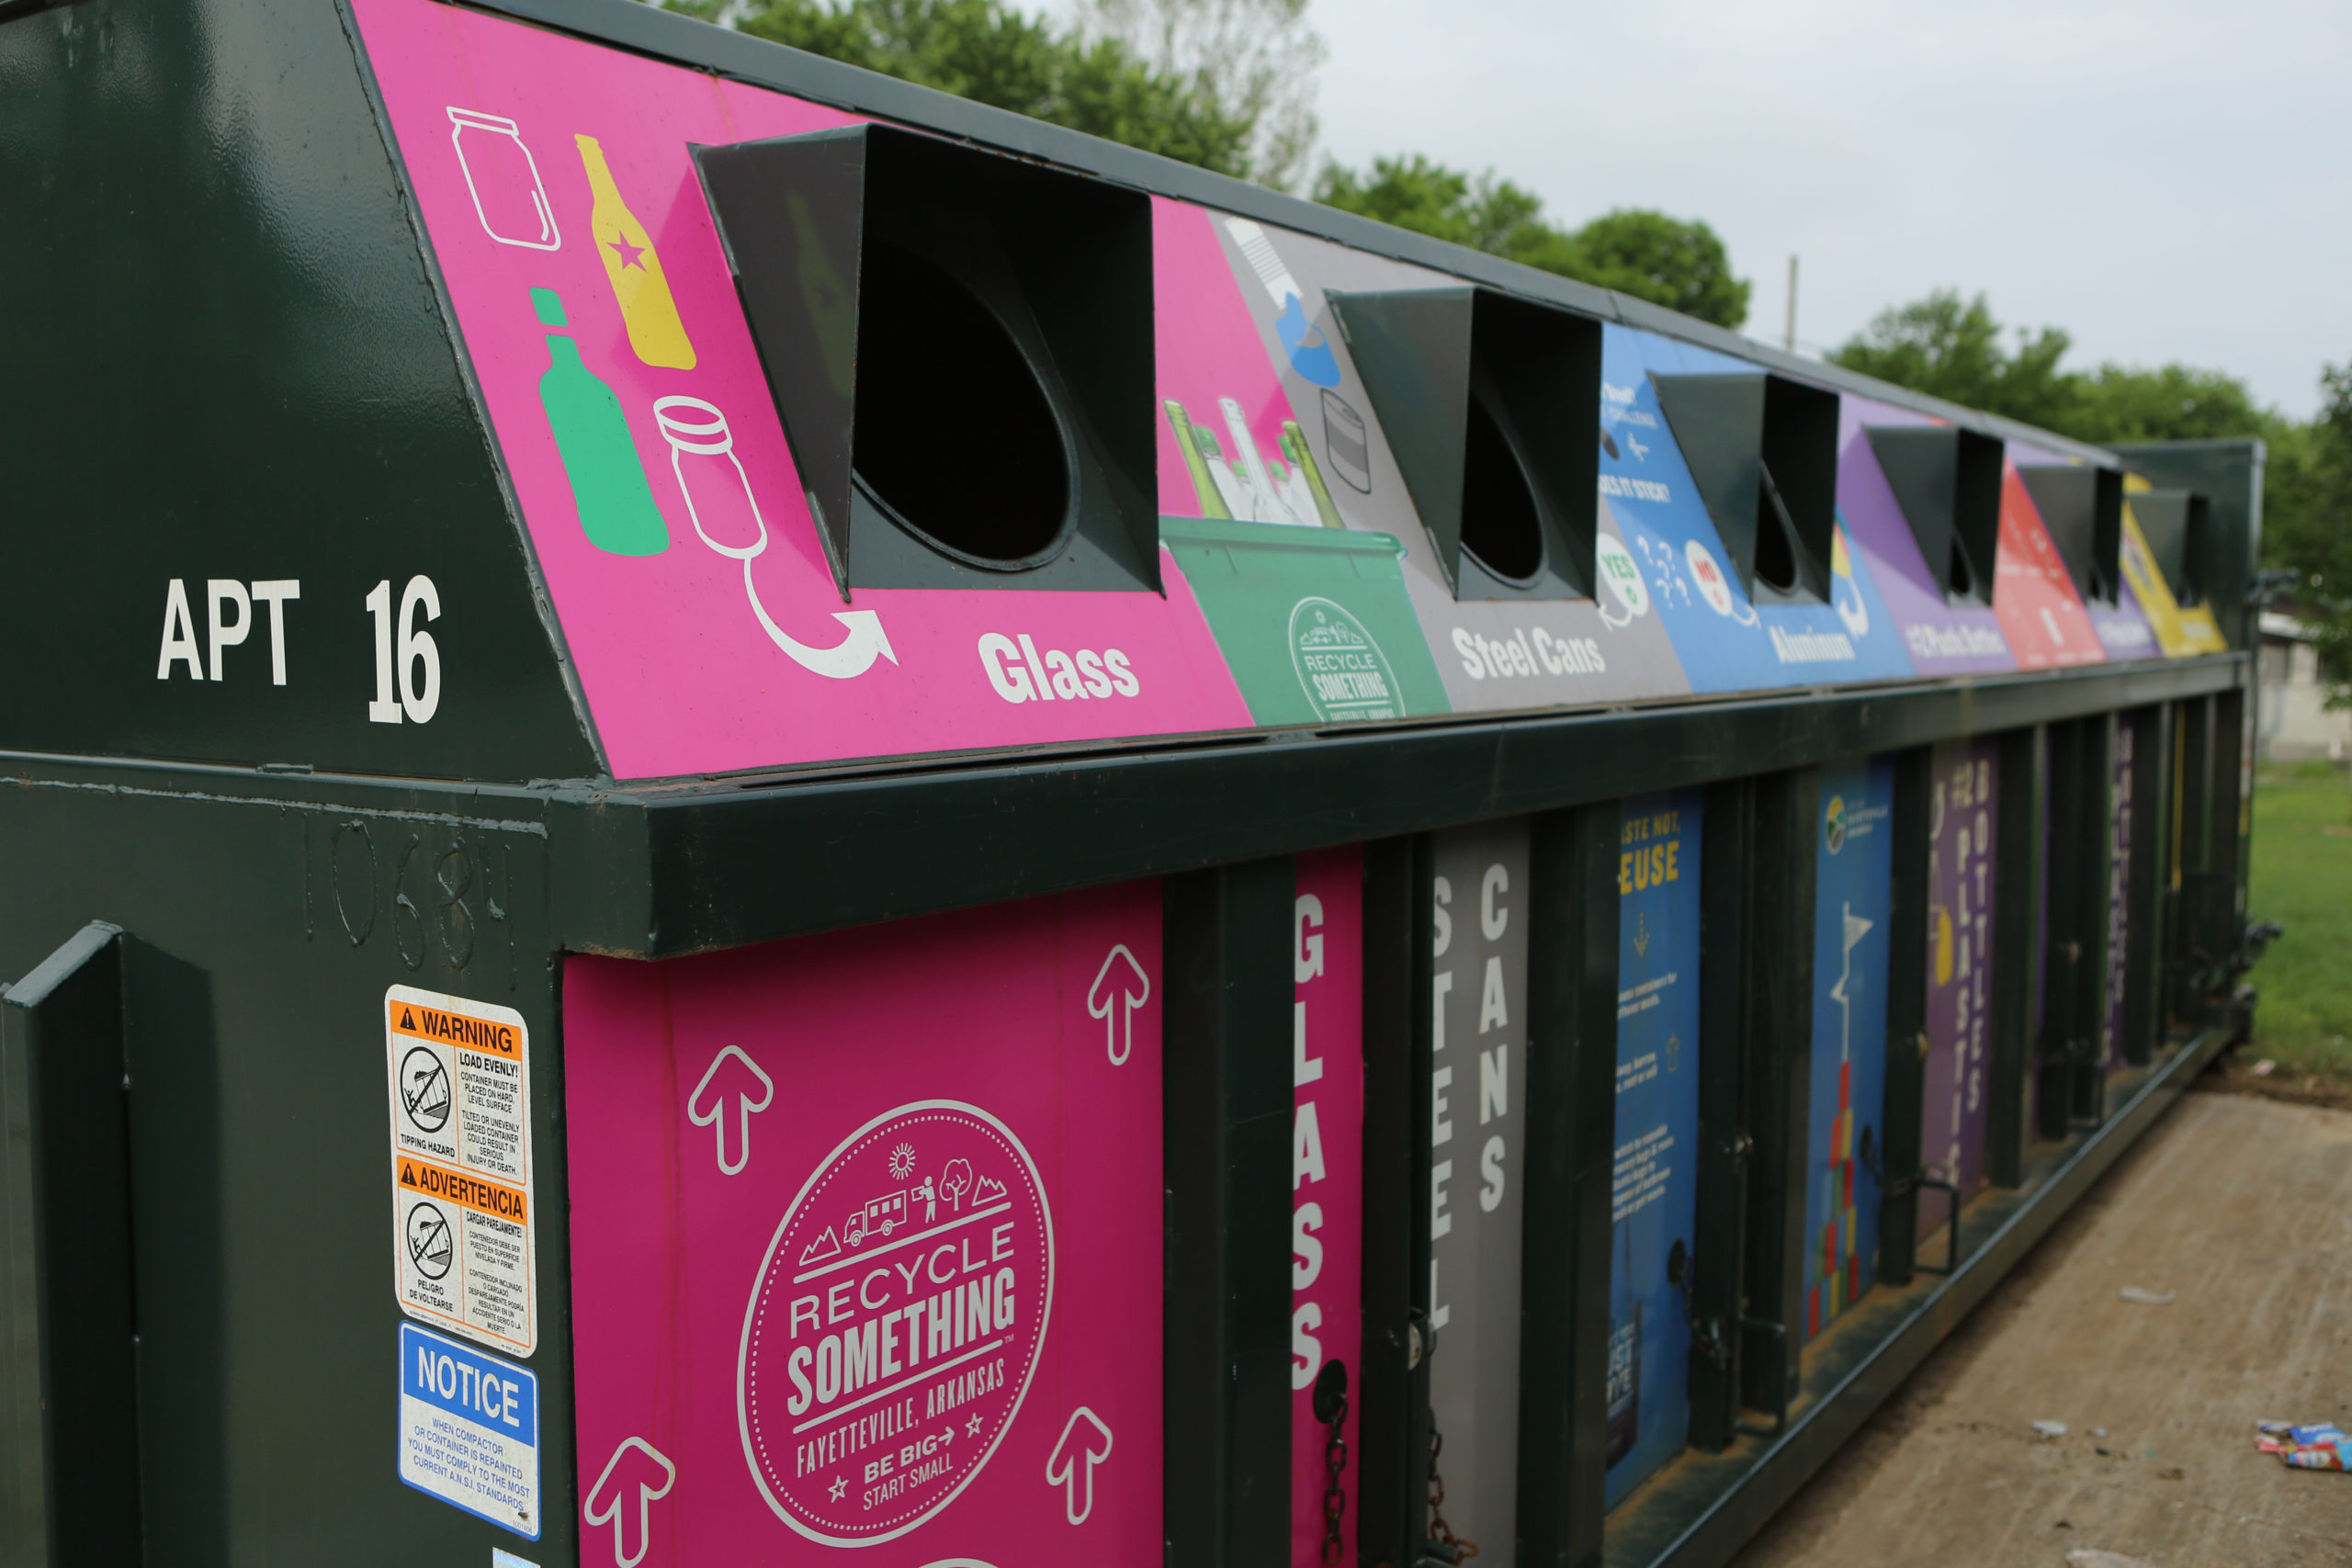 NWA Recycles to amp up regional recycling efforts